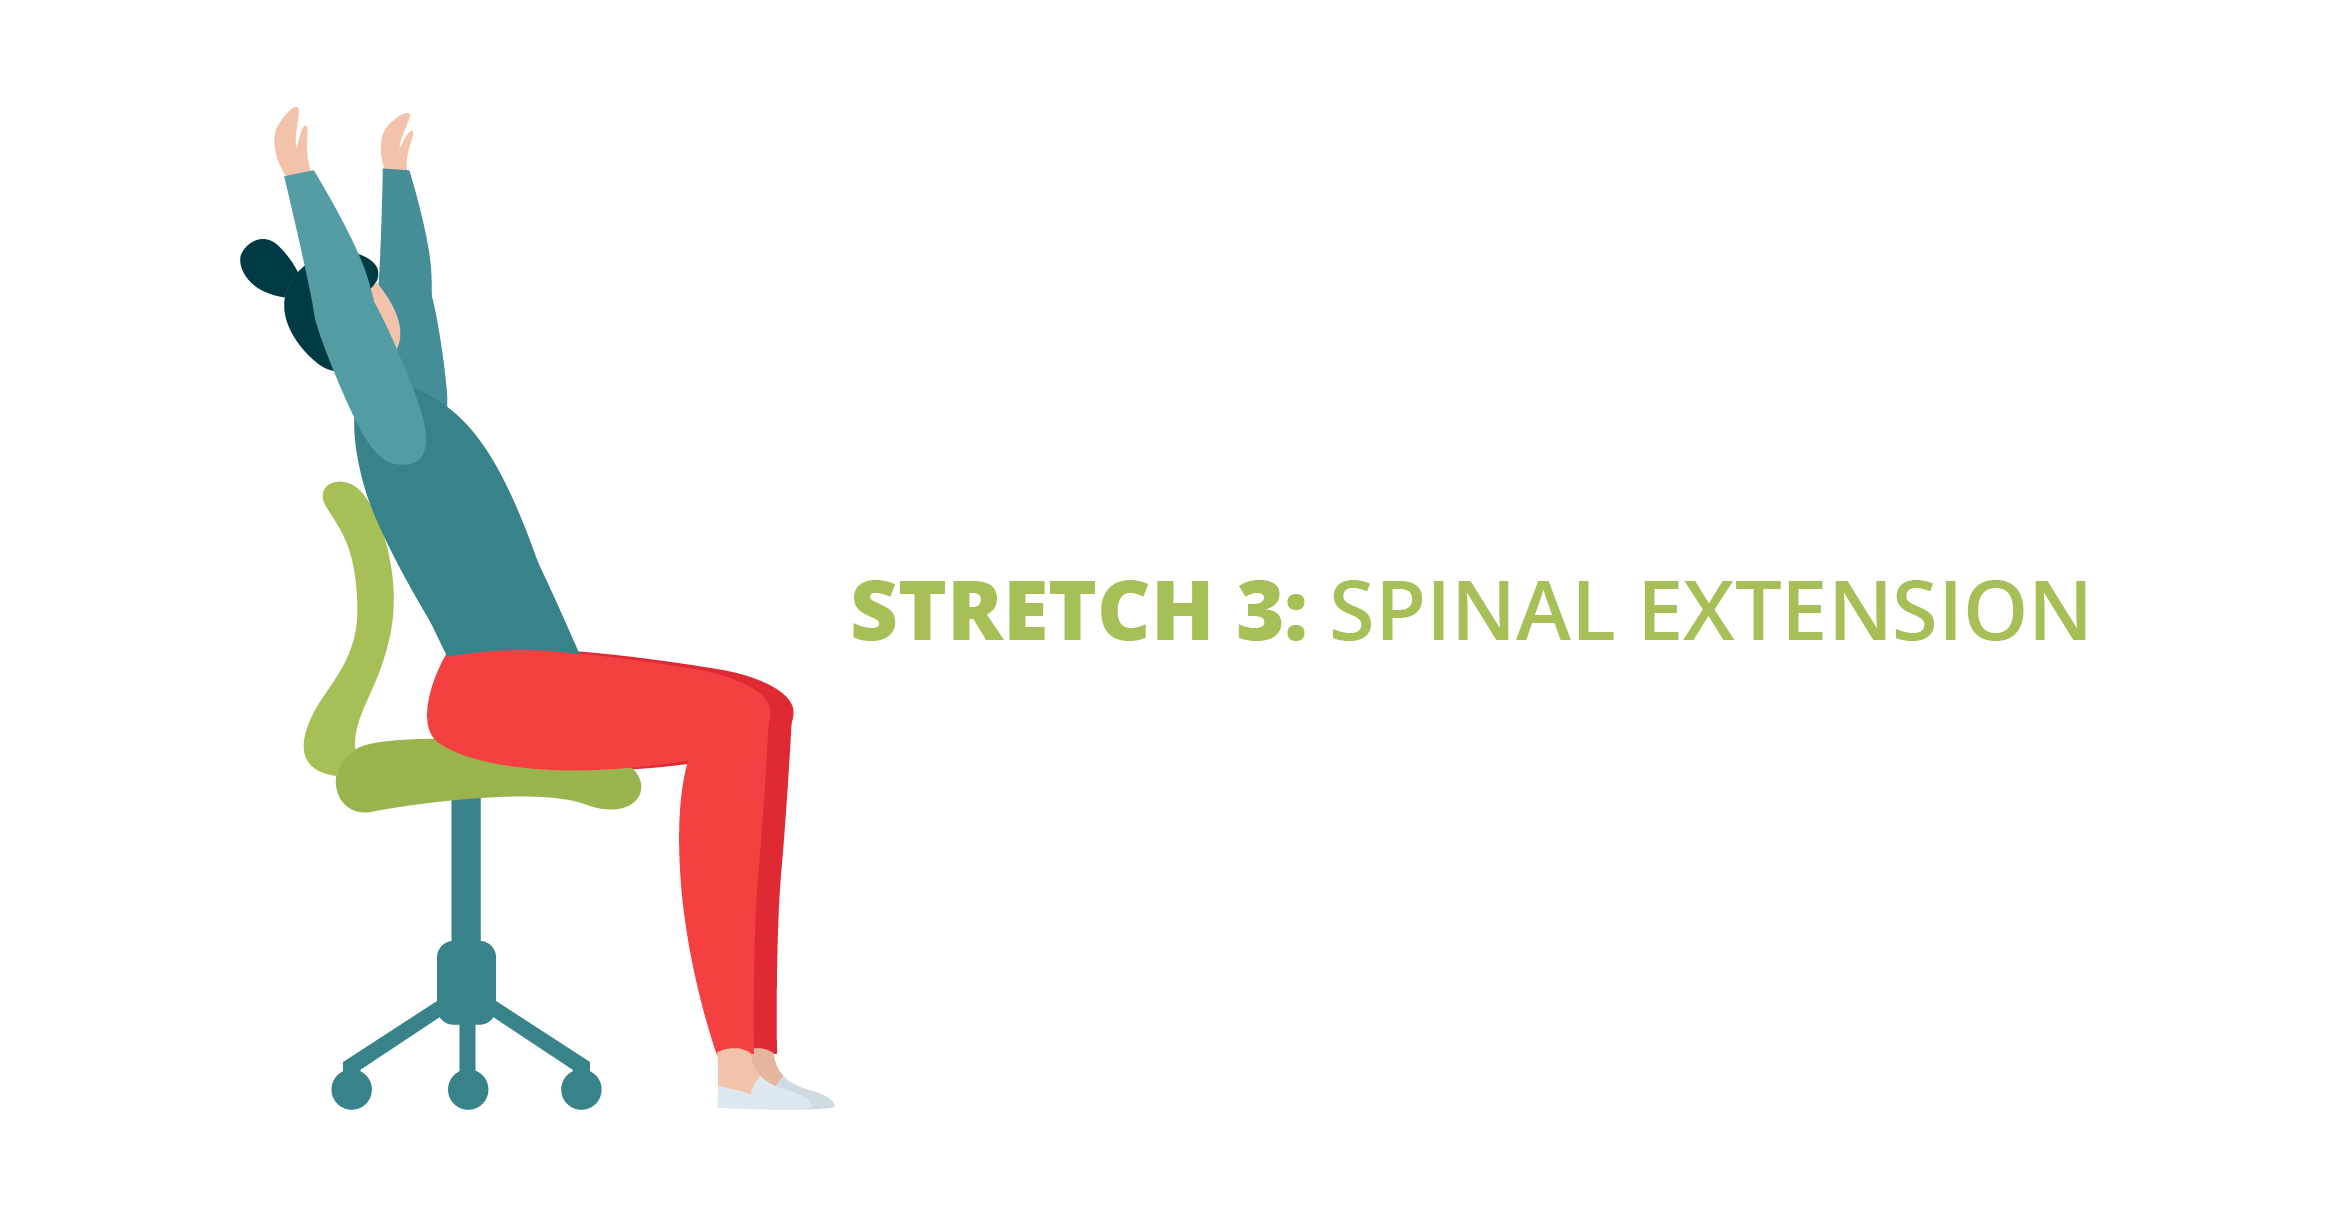 Stretch 3: Spinal Extension
